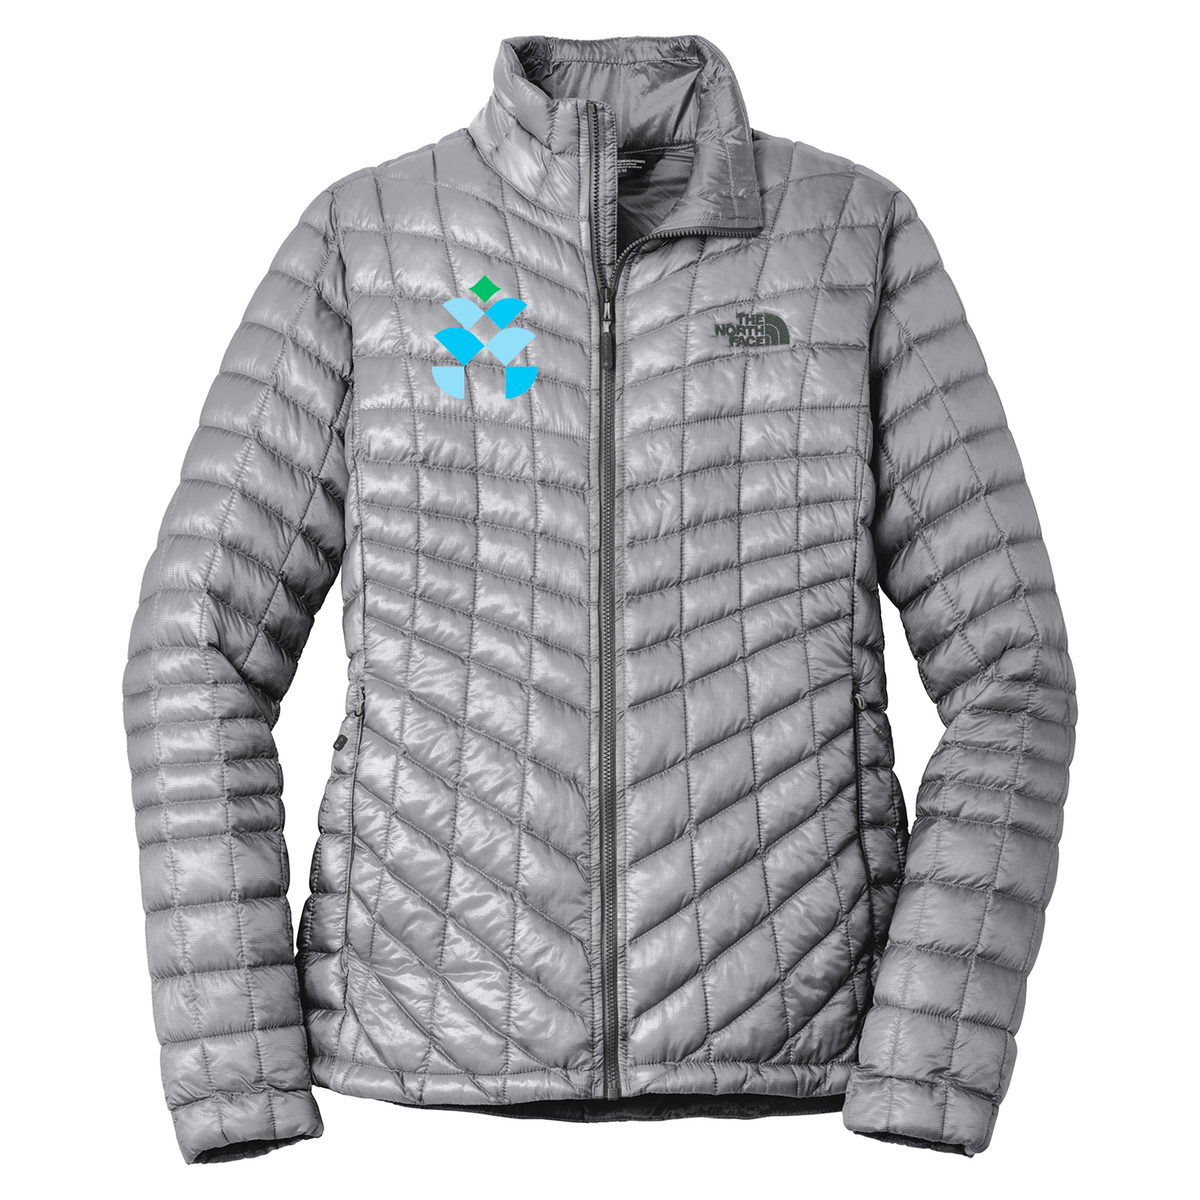 Mary Lee Foundation The North Face Ladies ThermoBall Jacket